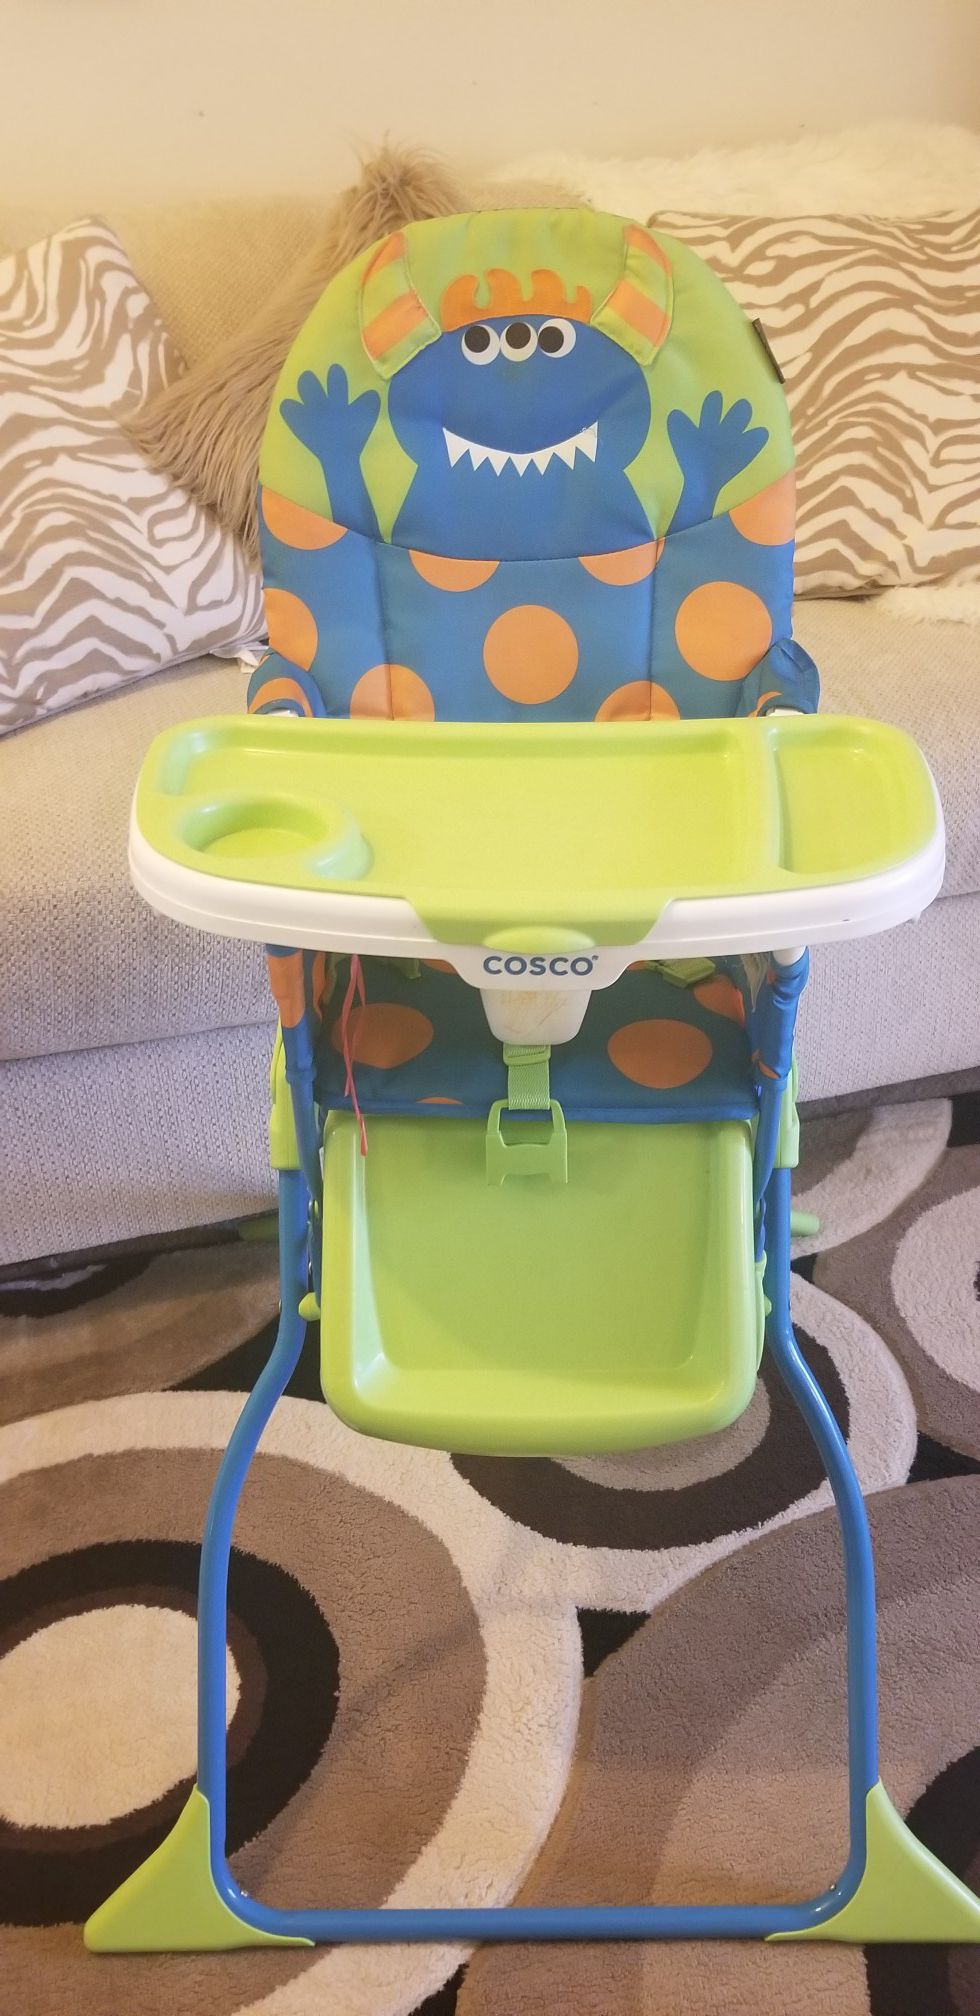 High chair for baby's